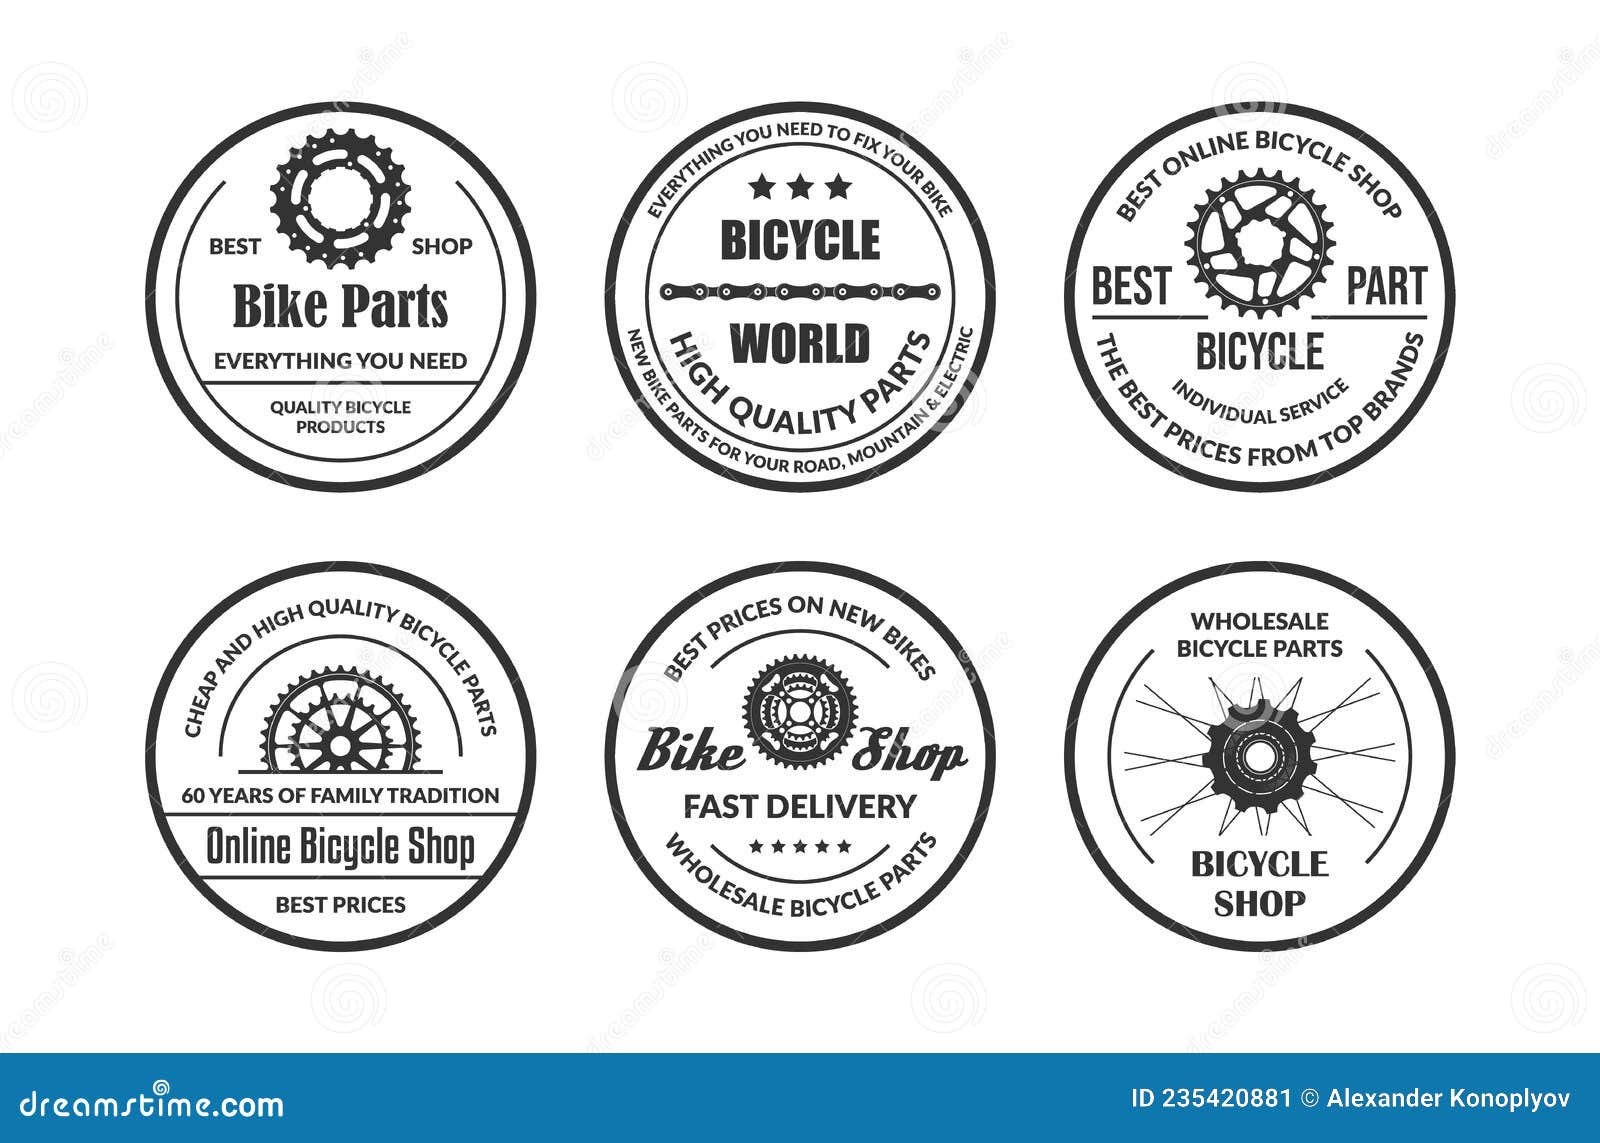 Online Bicycle Shop Circled Monochrome Pictogram Decorative Design Place for Text Vector Stock Vector